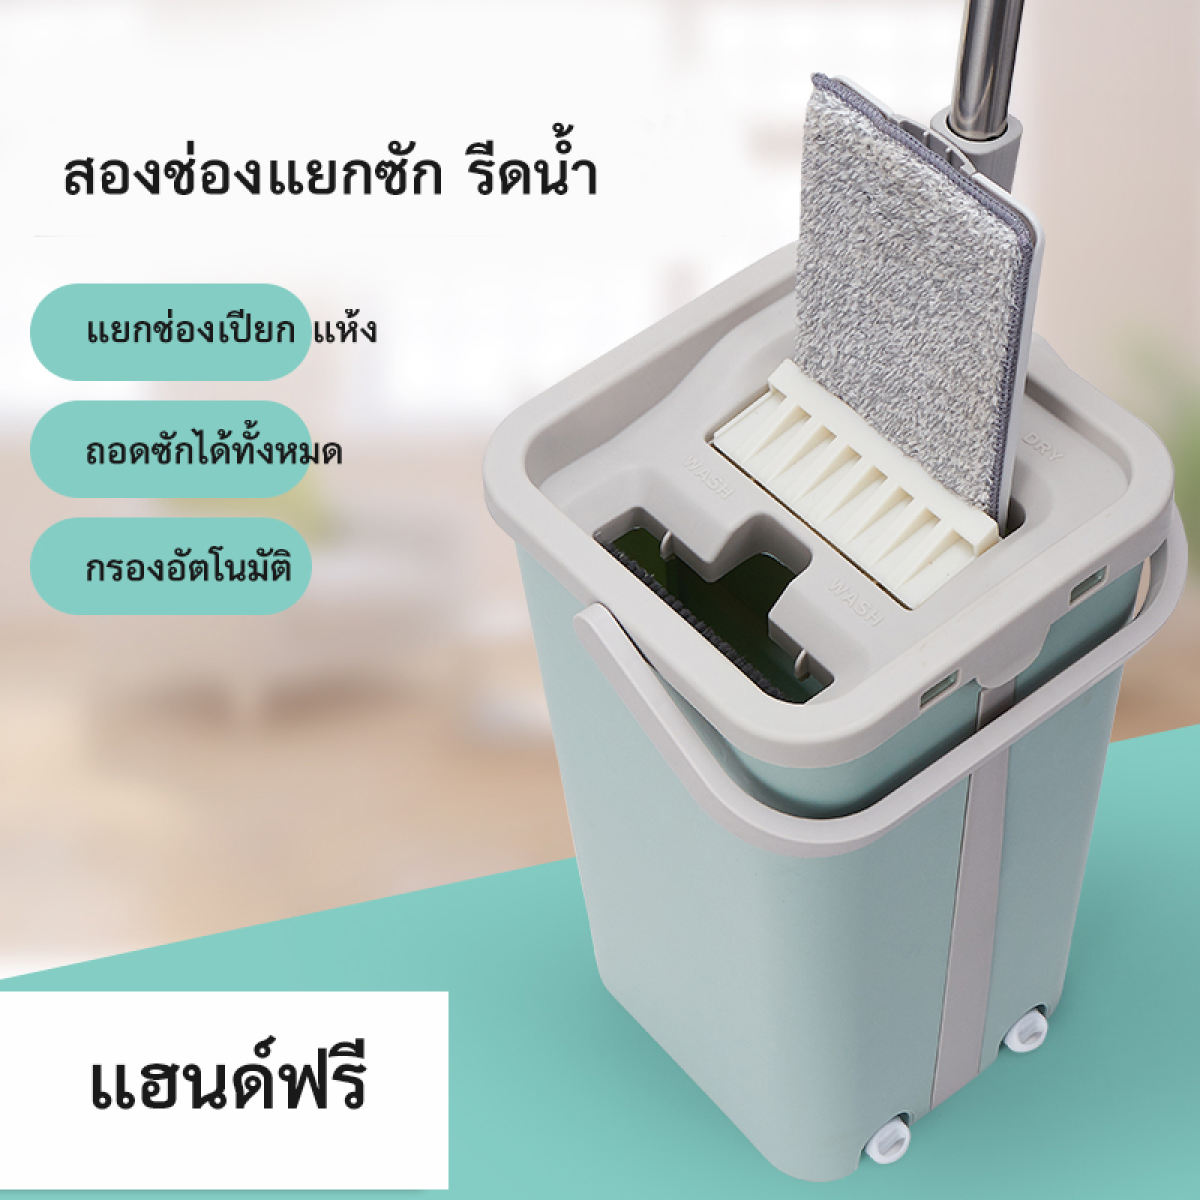 Microfiber Flat Mop, Wet Dry Floor Cleaning Hand Free, with 1 Bucket and 2 Reusable Mop Pads, Stainless Steel Handle, Extra Large ไม้ถูพื้นแบบเรียบแบบแฮนด์ฟรี  ไม้ถูพื้นพร้อมถังซัก